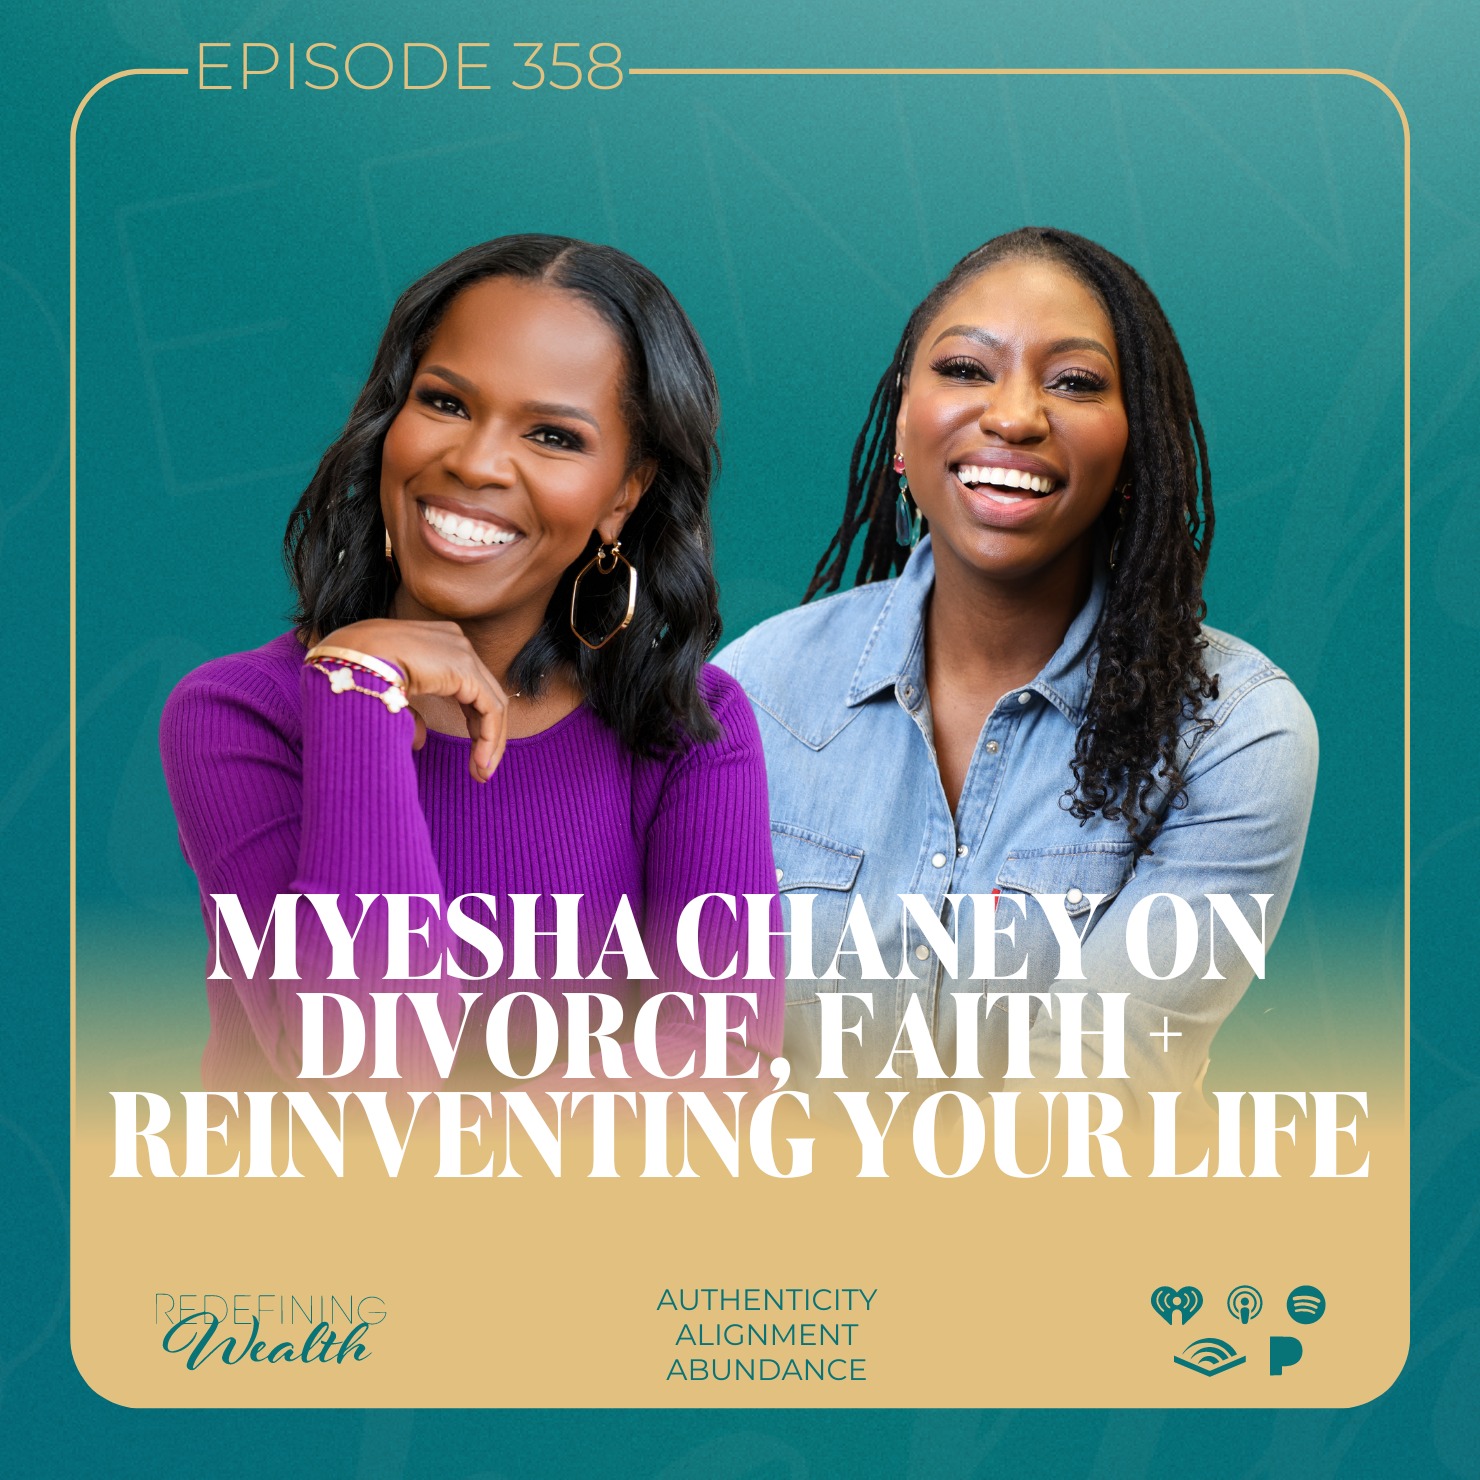 Myesha Chaney on Divorce, Faith, and Reinventing Your Life